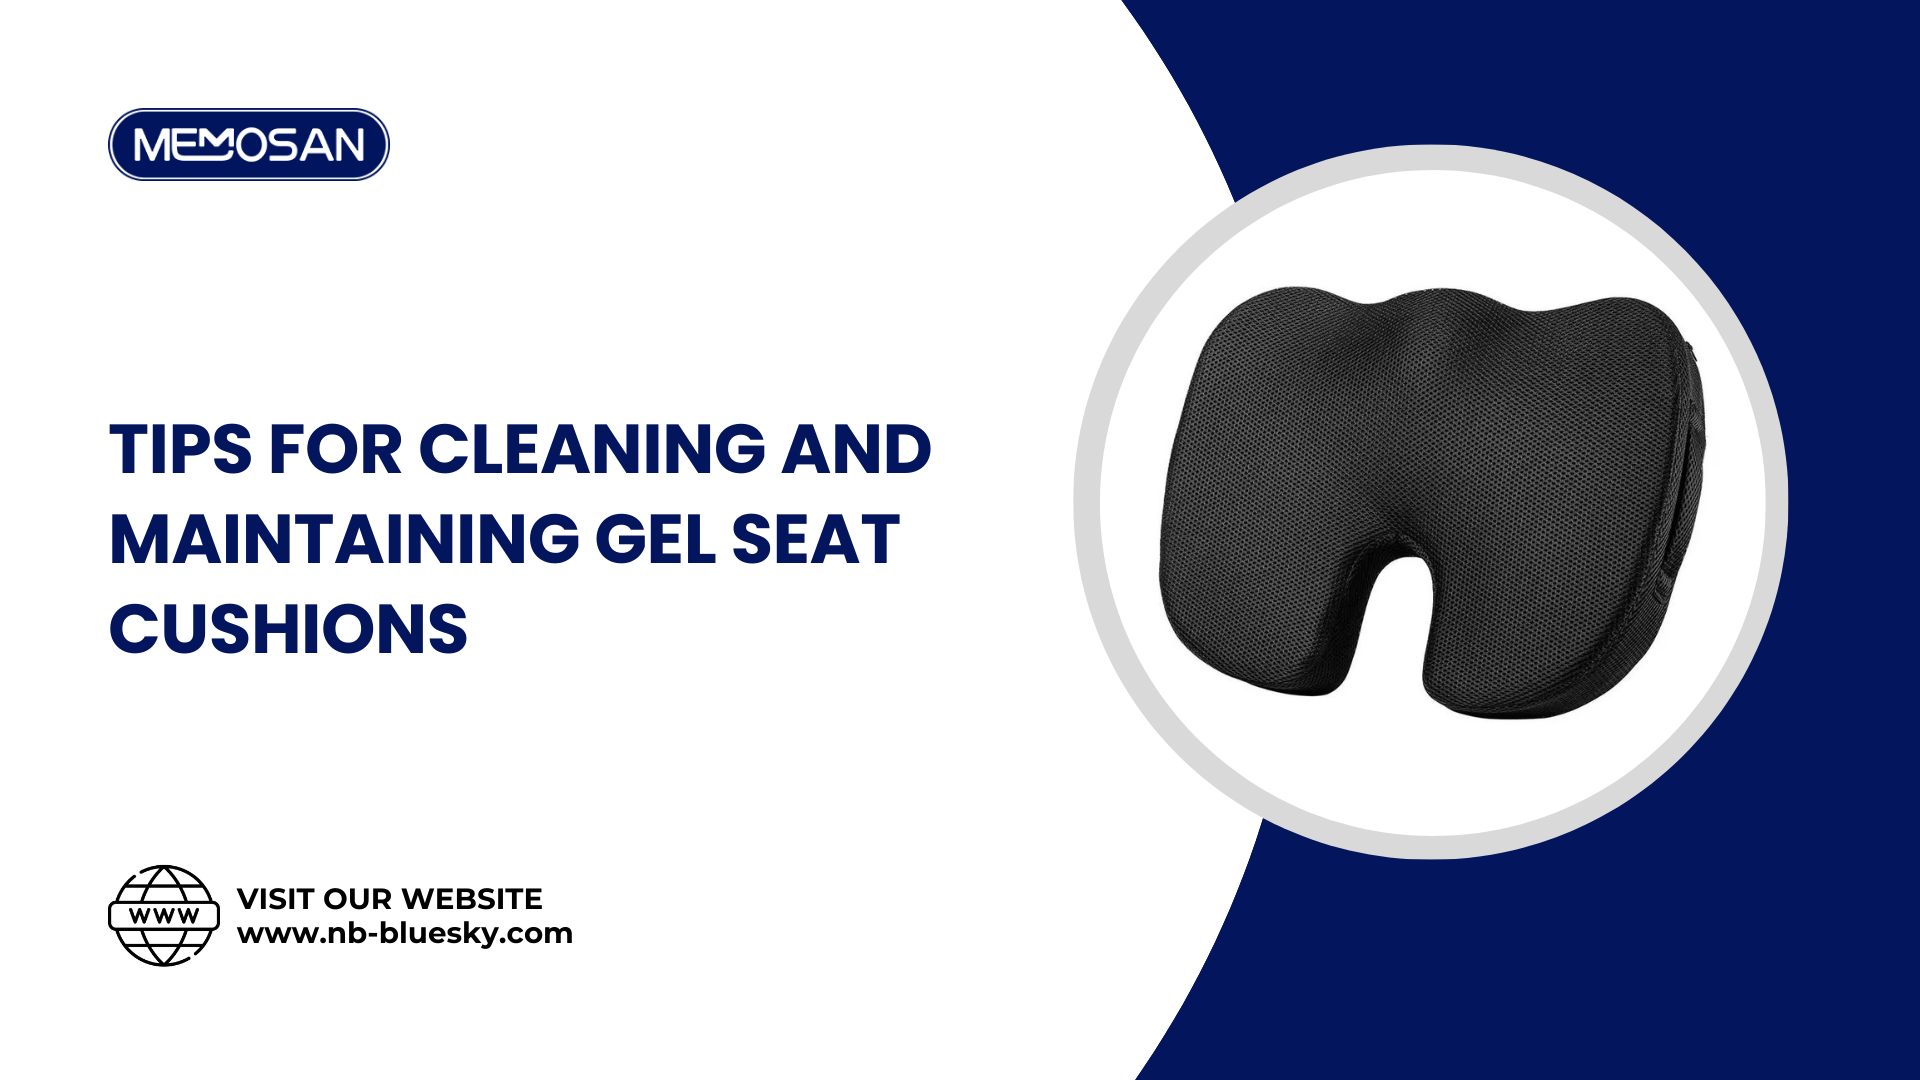 Tips for Cleaning and Maintaining Gel Seat Cushions